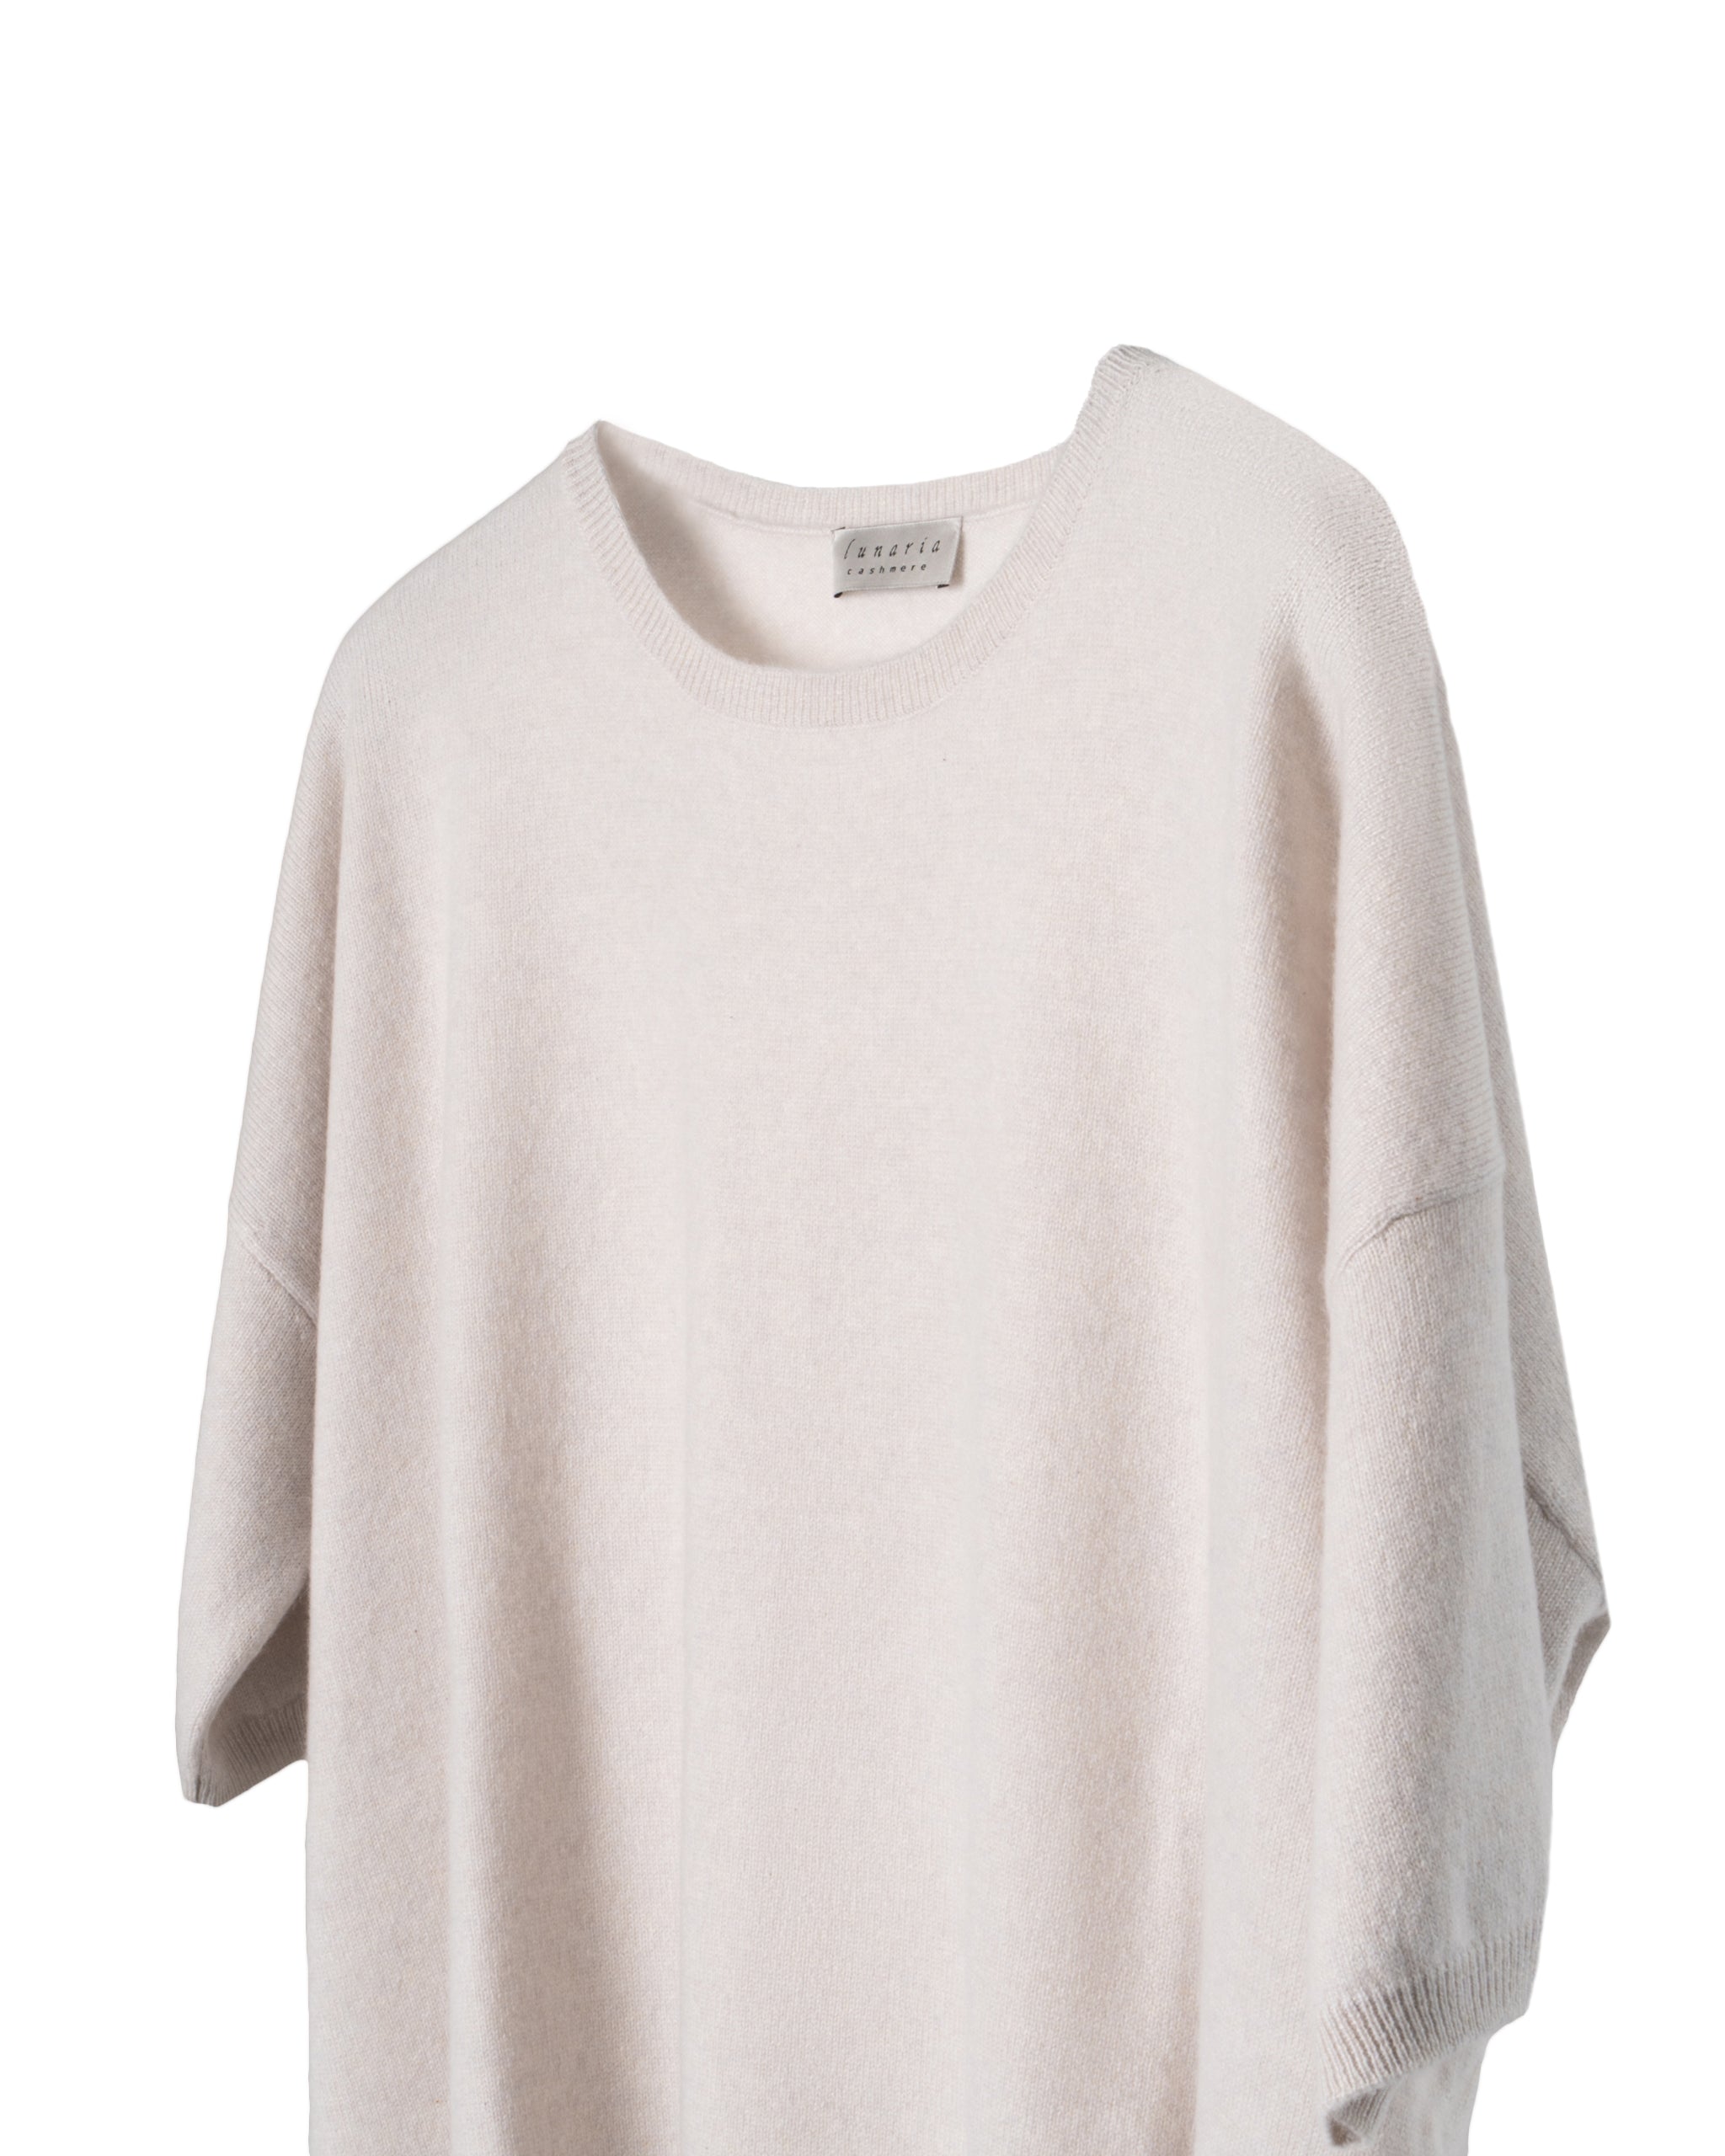 2PLY CASHMERE-OVERSIZE CREW NECK SWEATER